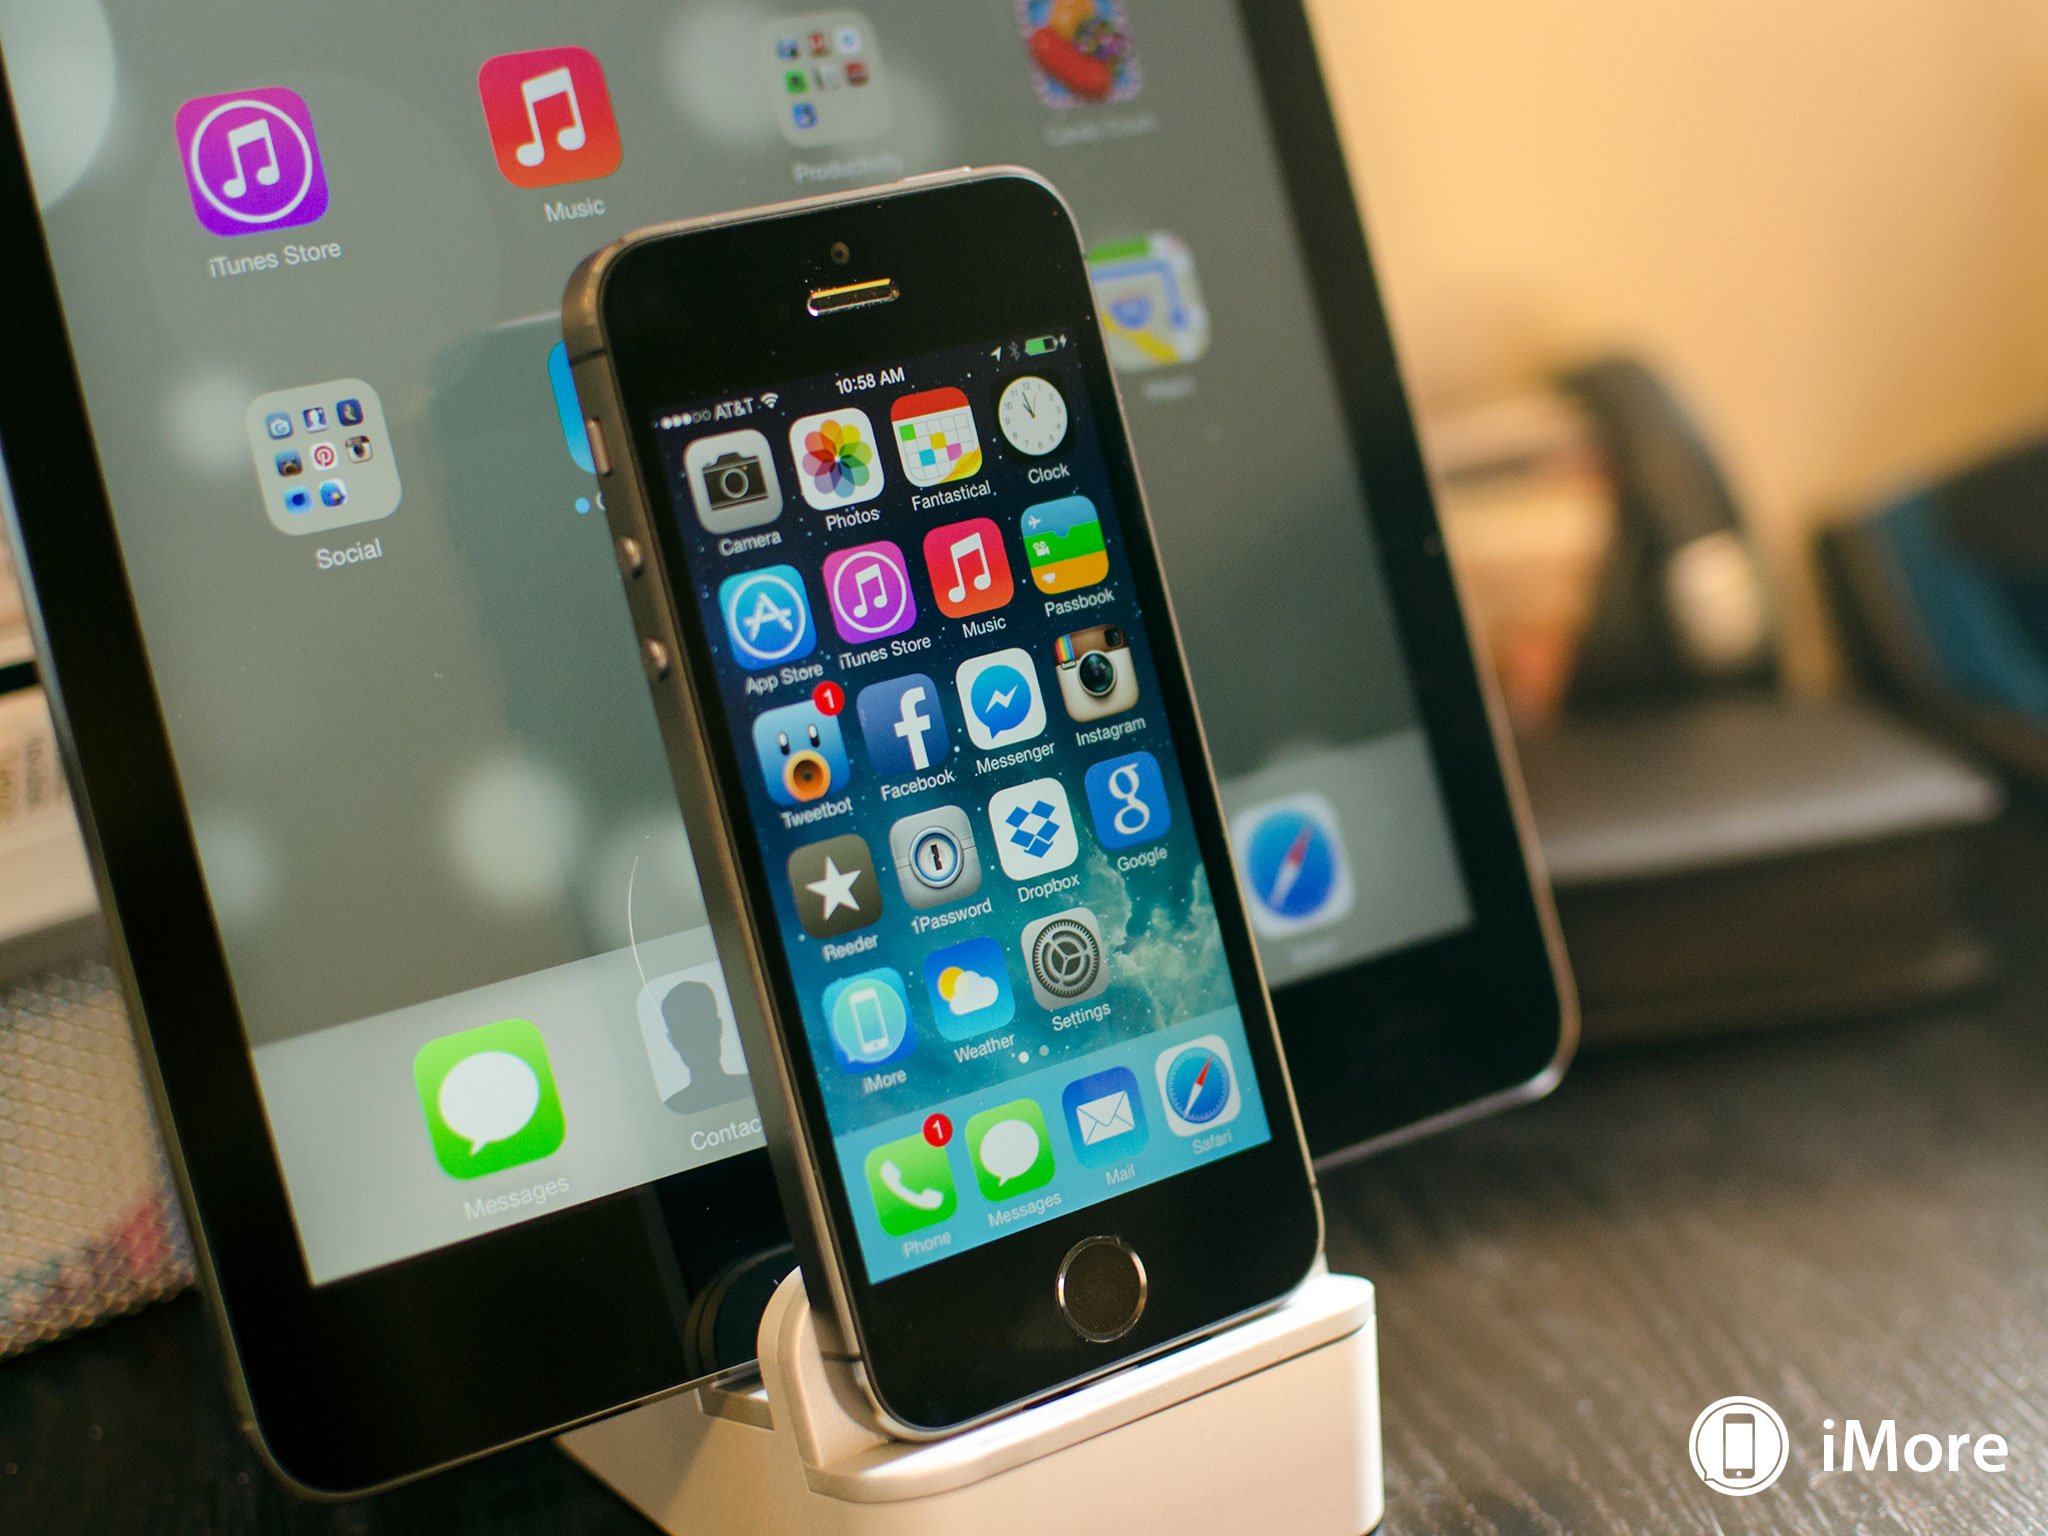 Why you should wait to jailbreak iOS 7